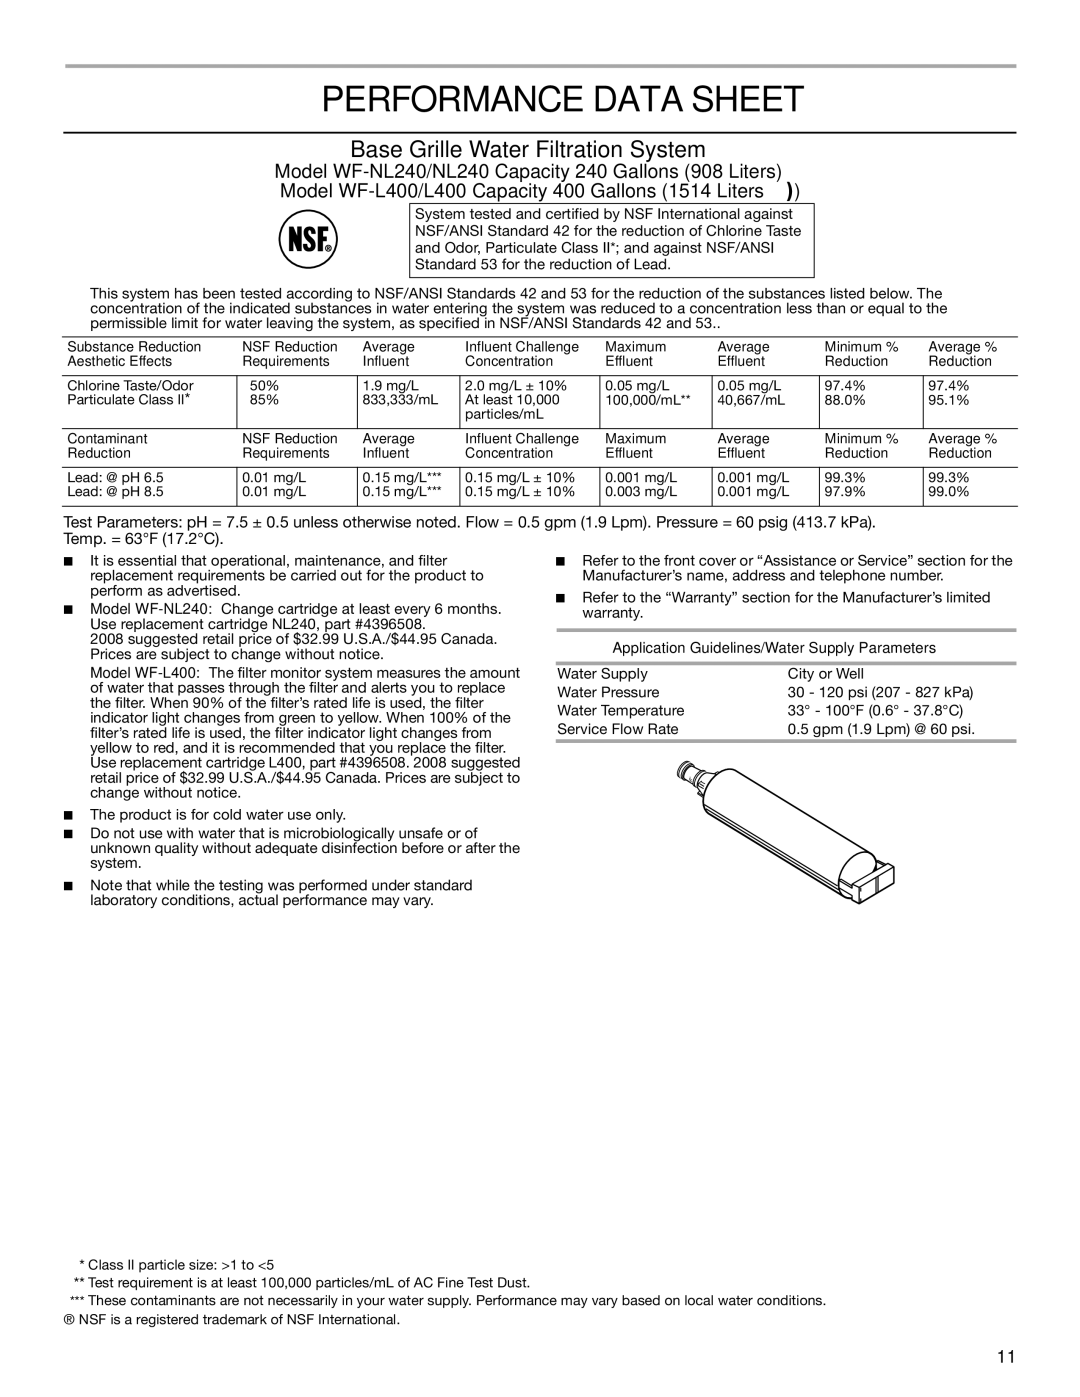 Estate W10193170A installation instructions Performance Data Sheet, Base Grille Water Filtration System 